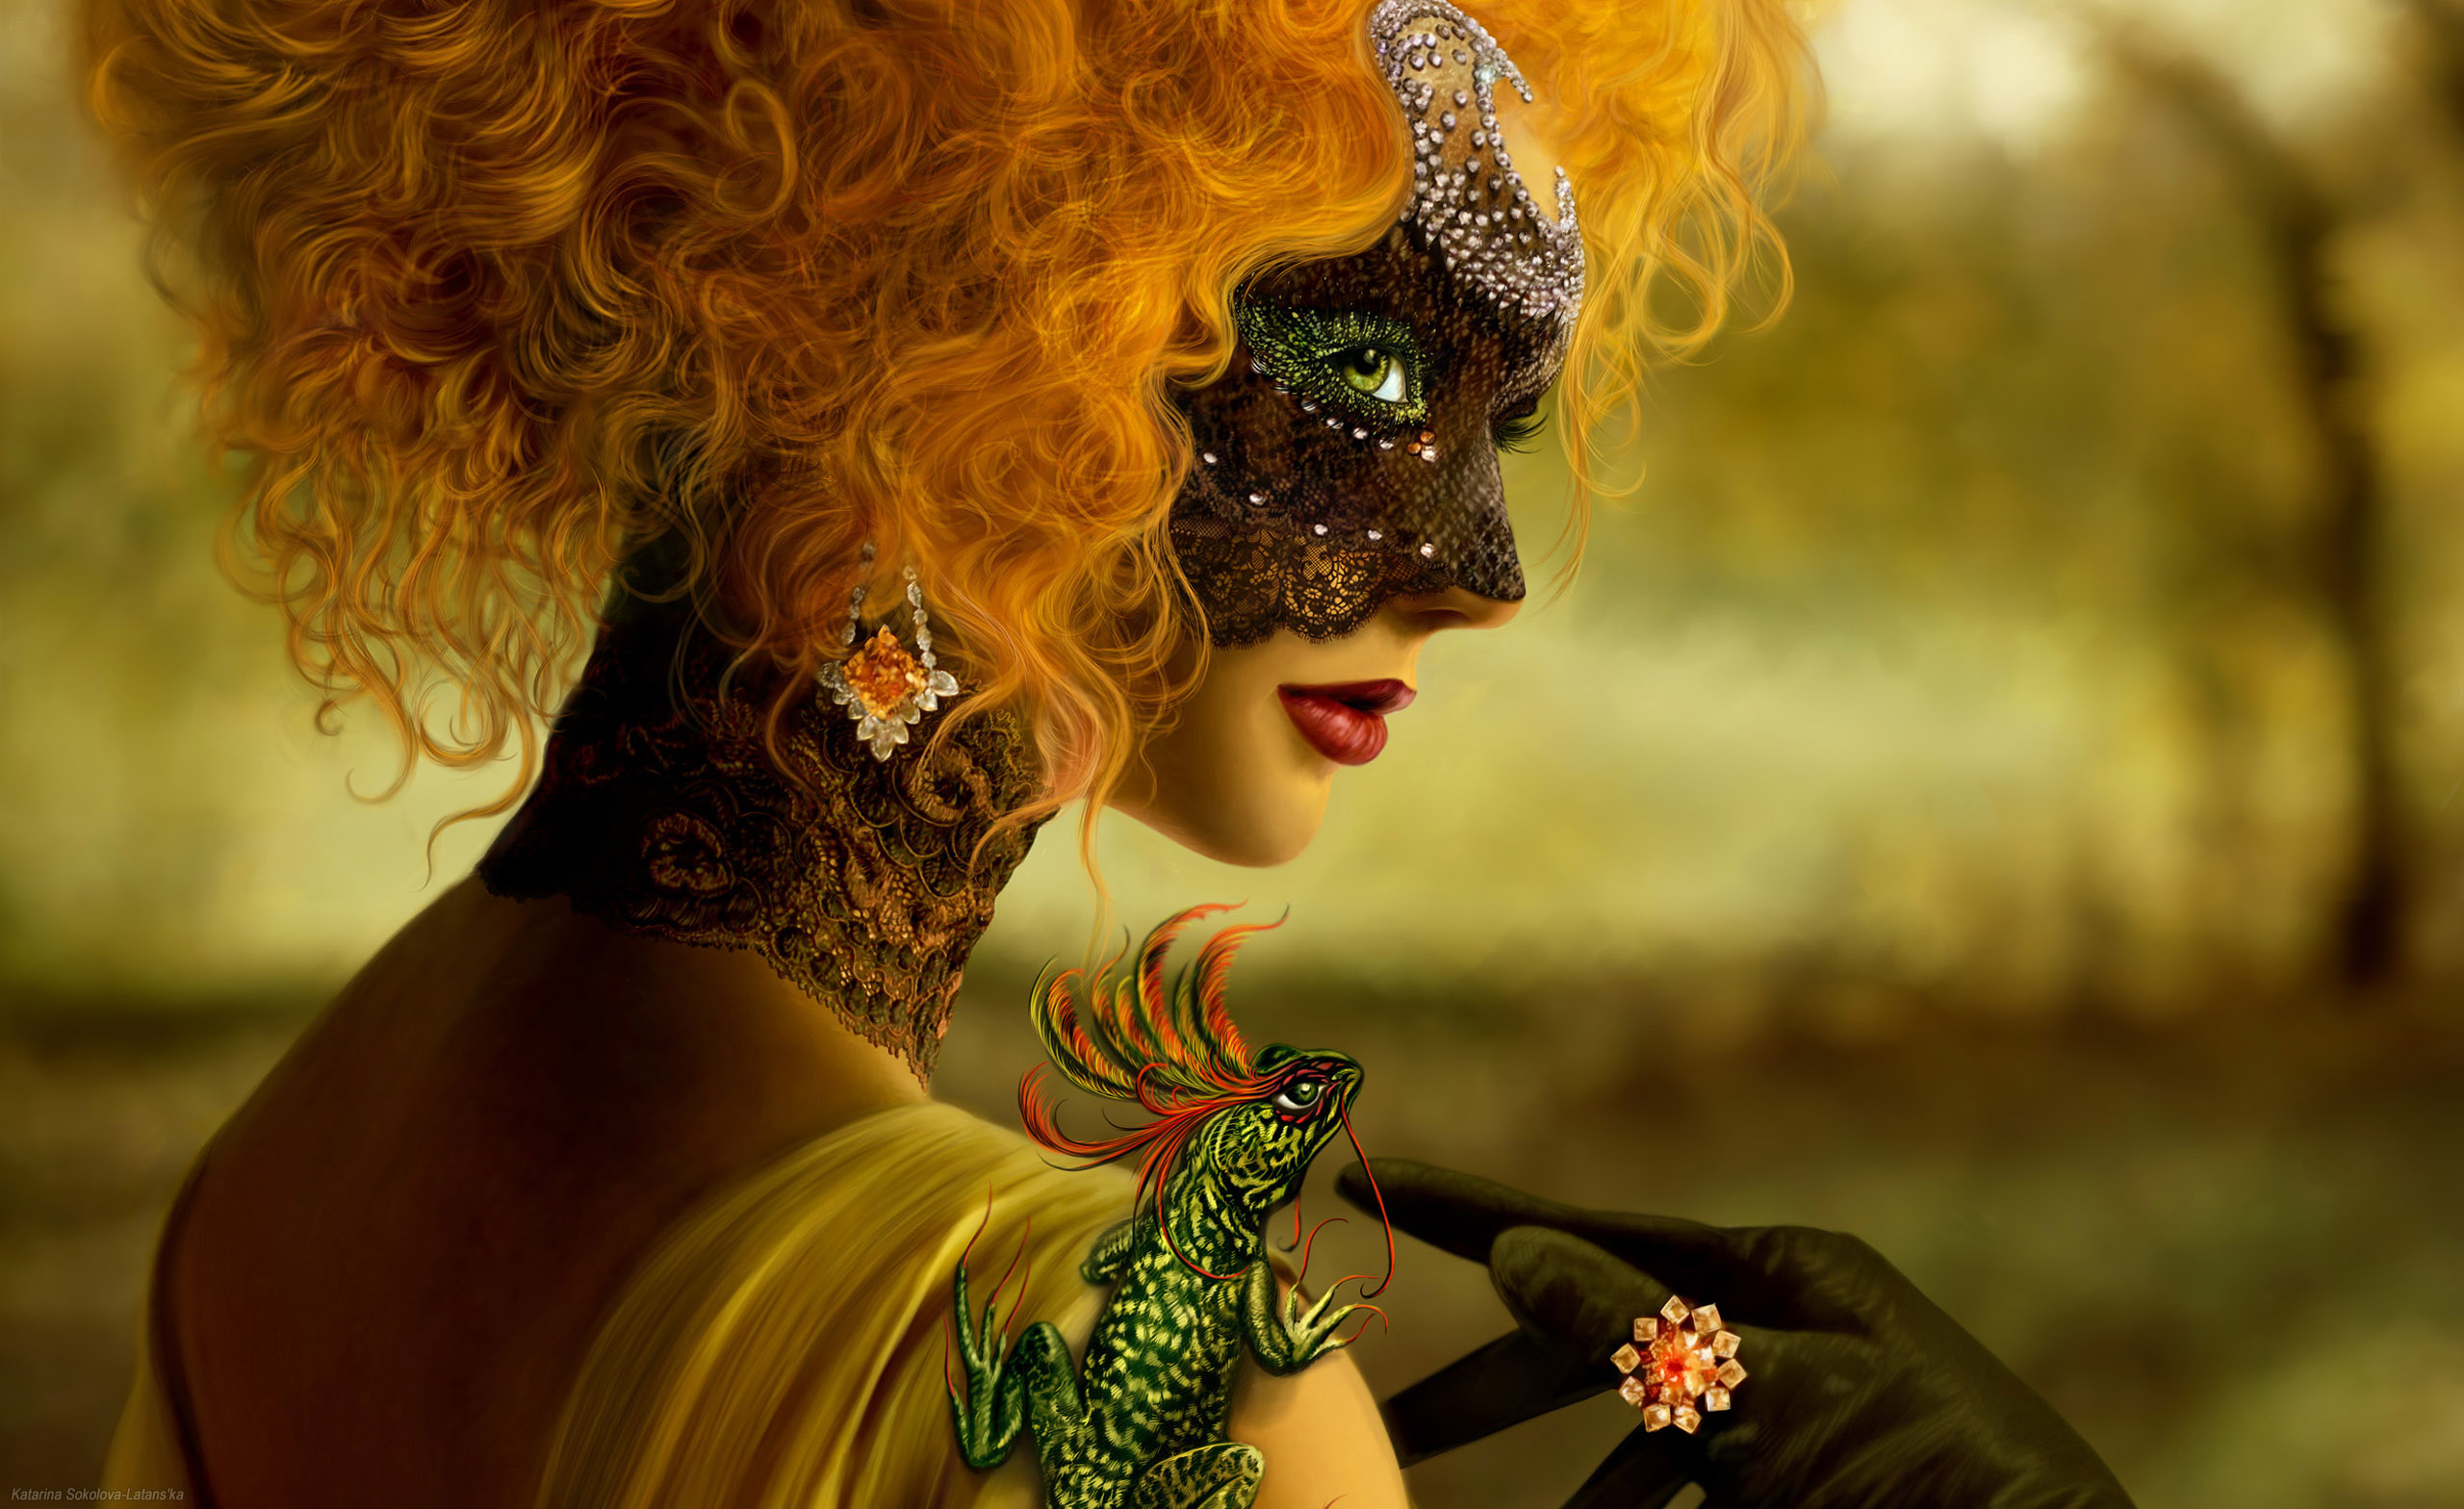 fantasy, women, glove, jewelry, lipstick, lizard, mask, masquerade, redhead wallpapers for tablet